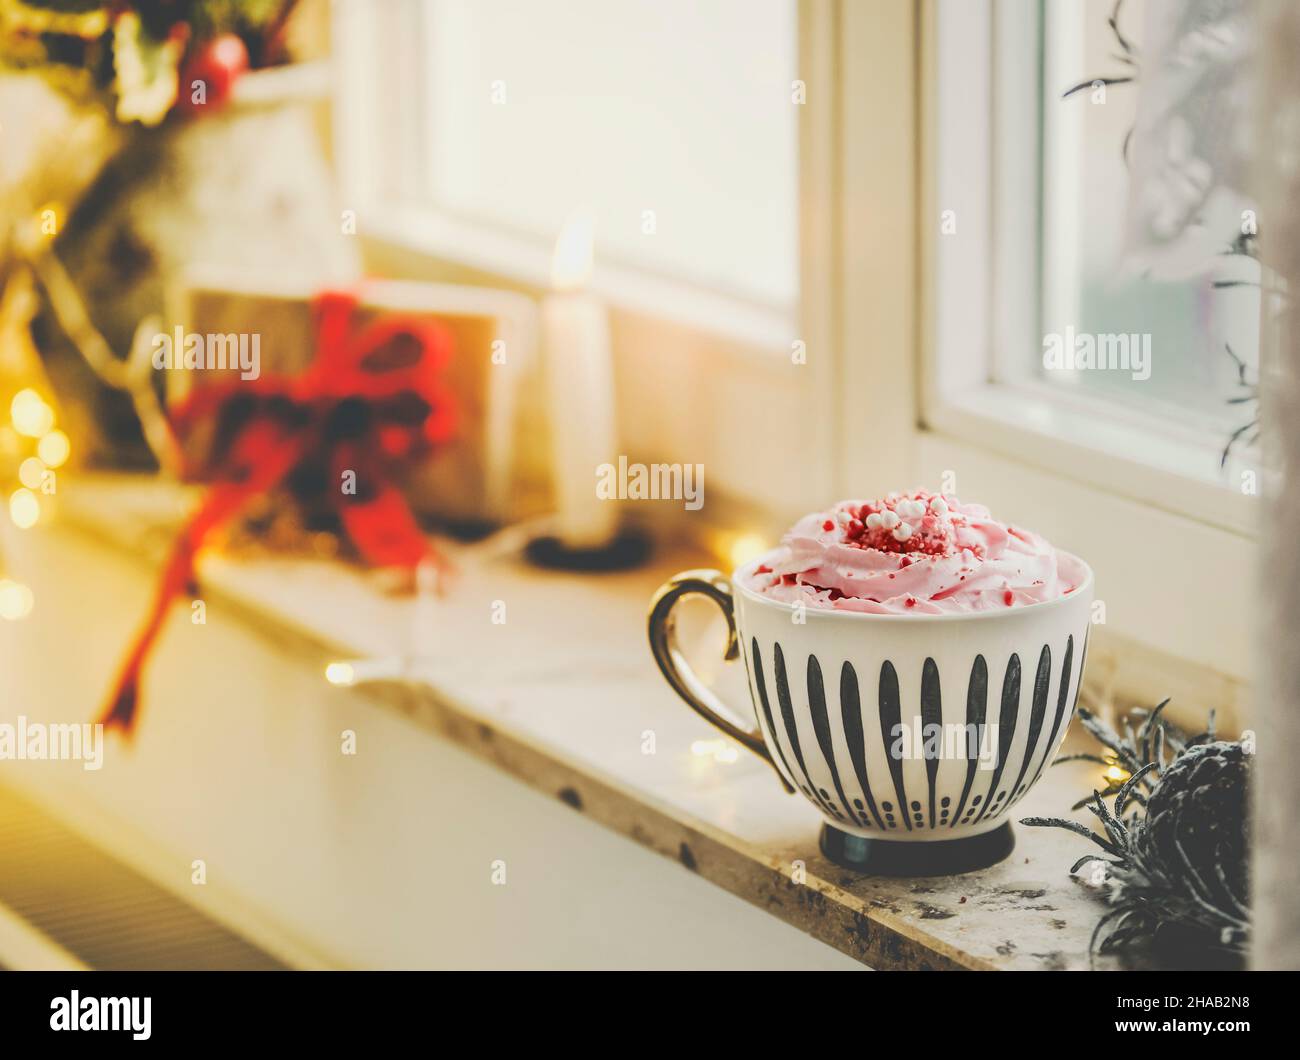 Mug with hot chocolate and whipped cream on window sill with candle, present and warm light. Hygge winter at home with warming drink. Stock Photo